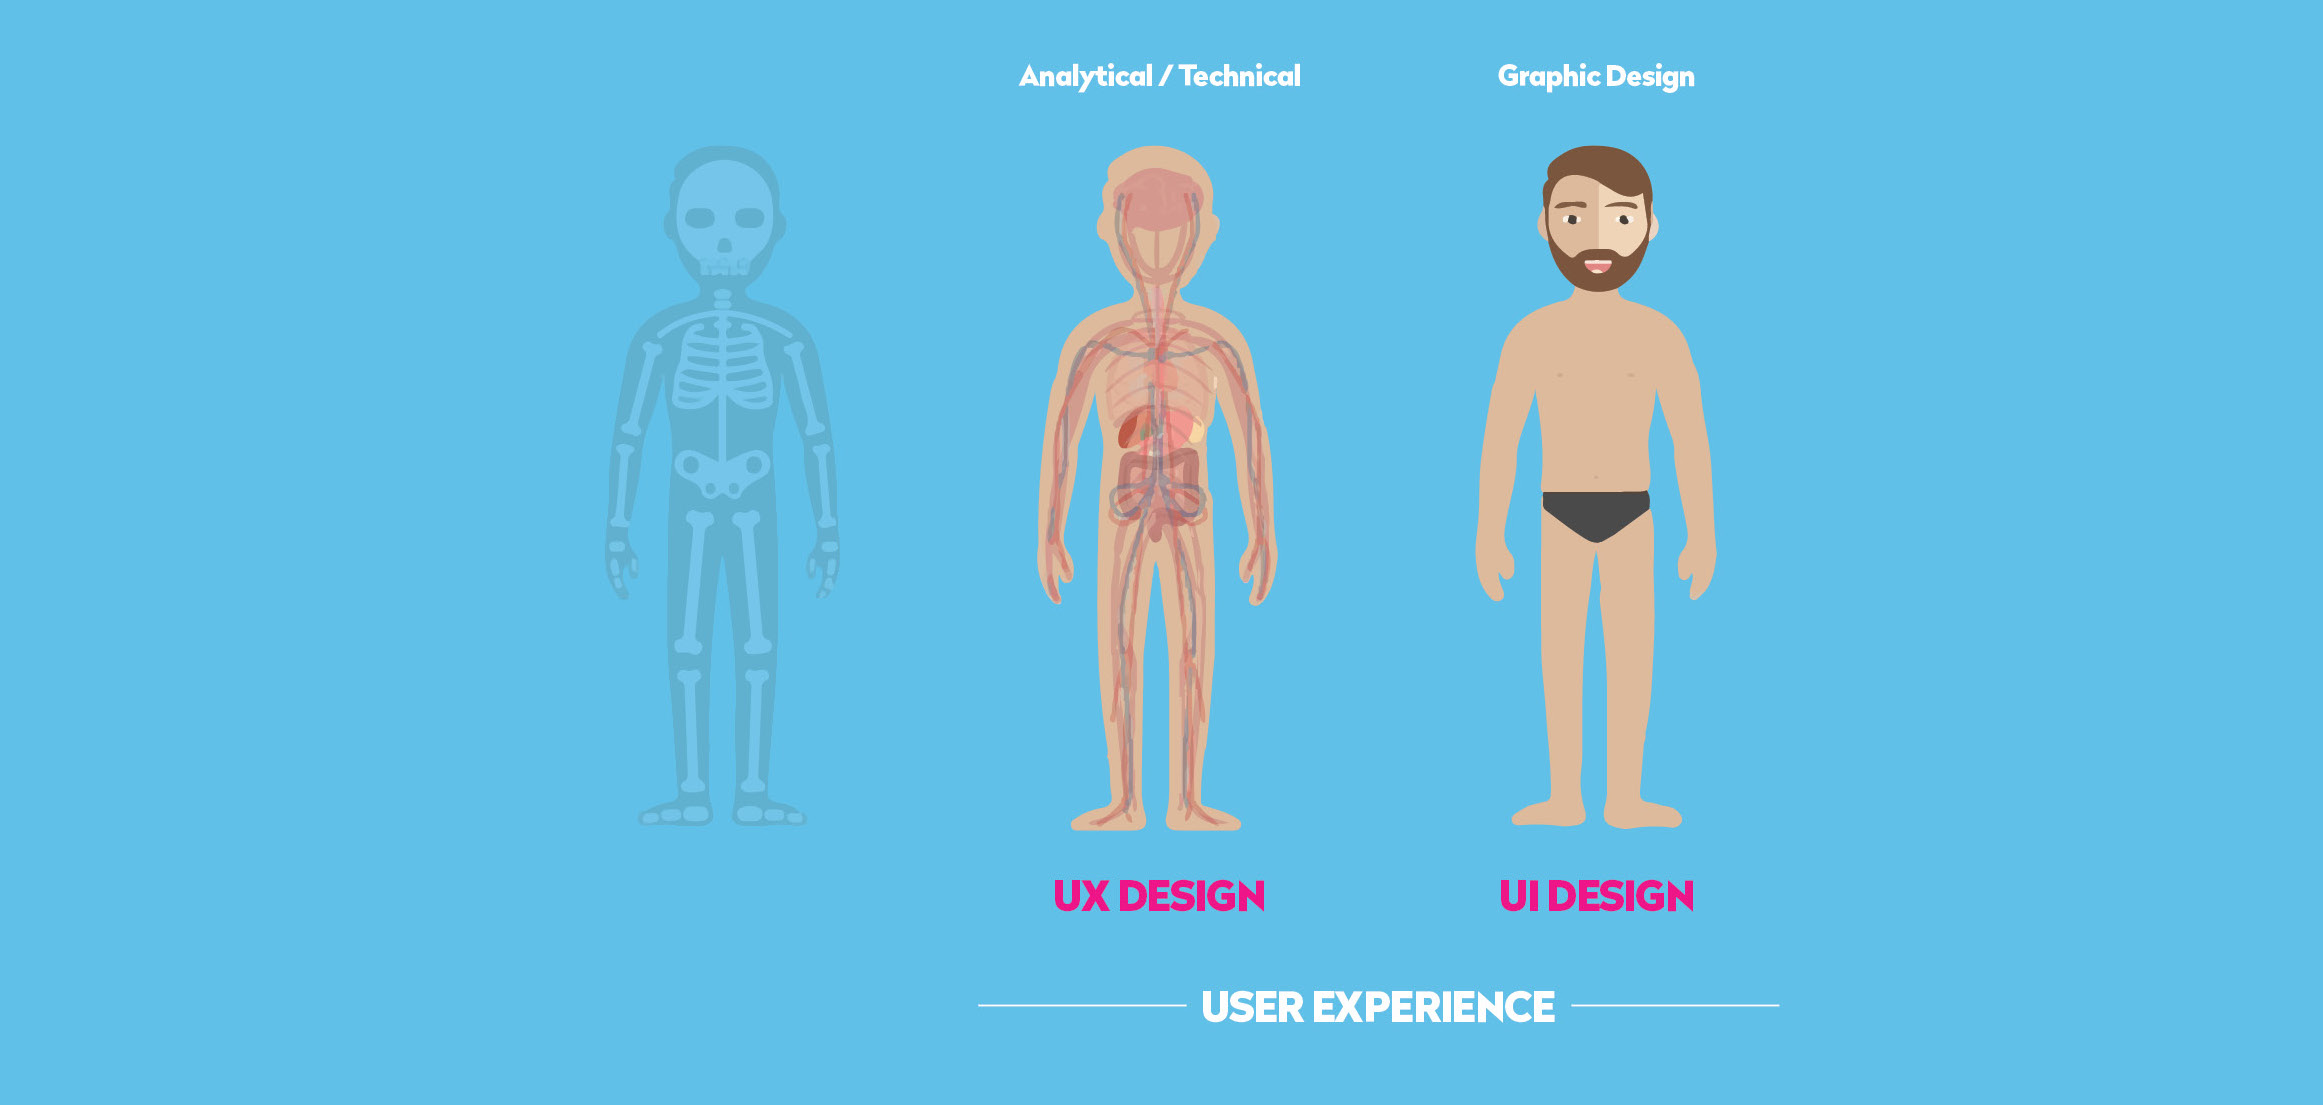 user-experience-vs-user-interface-bammboo-growth-hacking-strategy